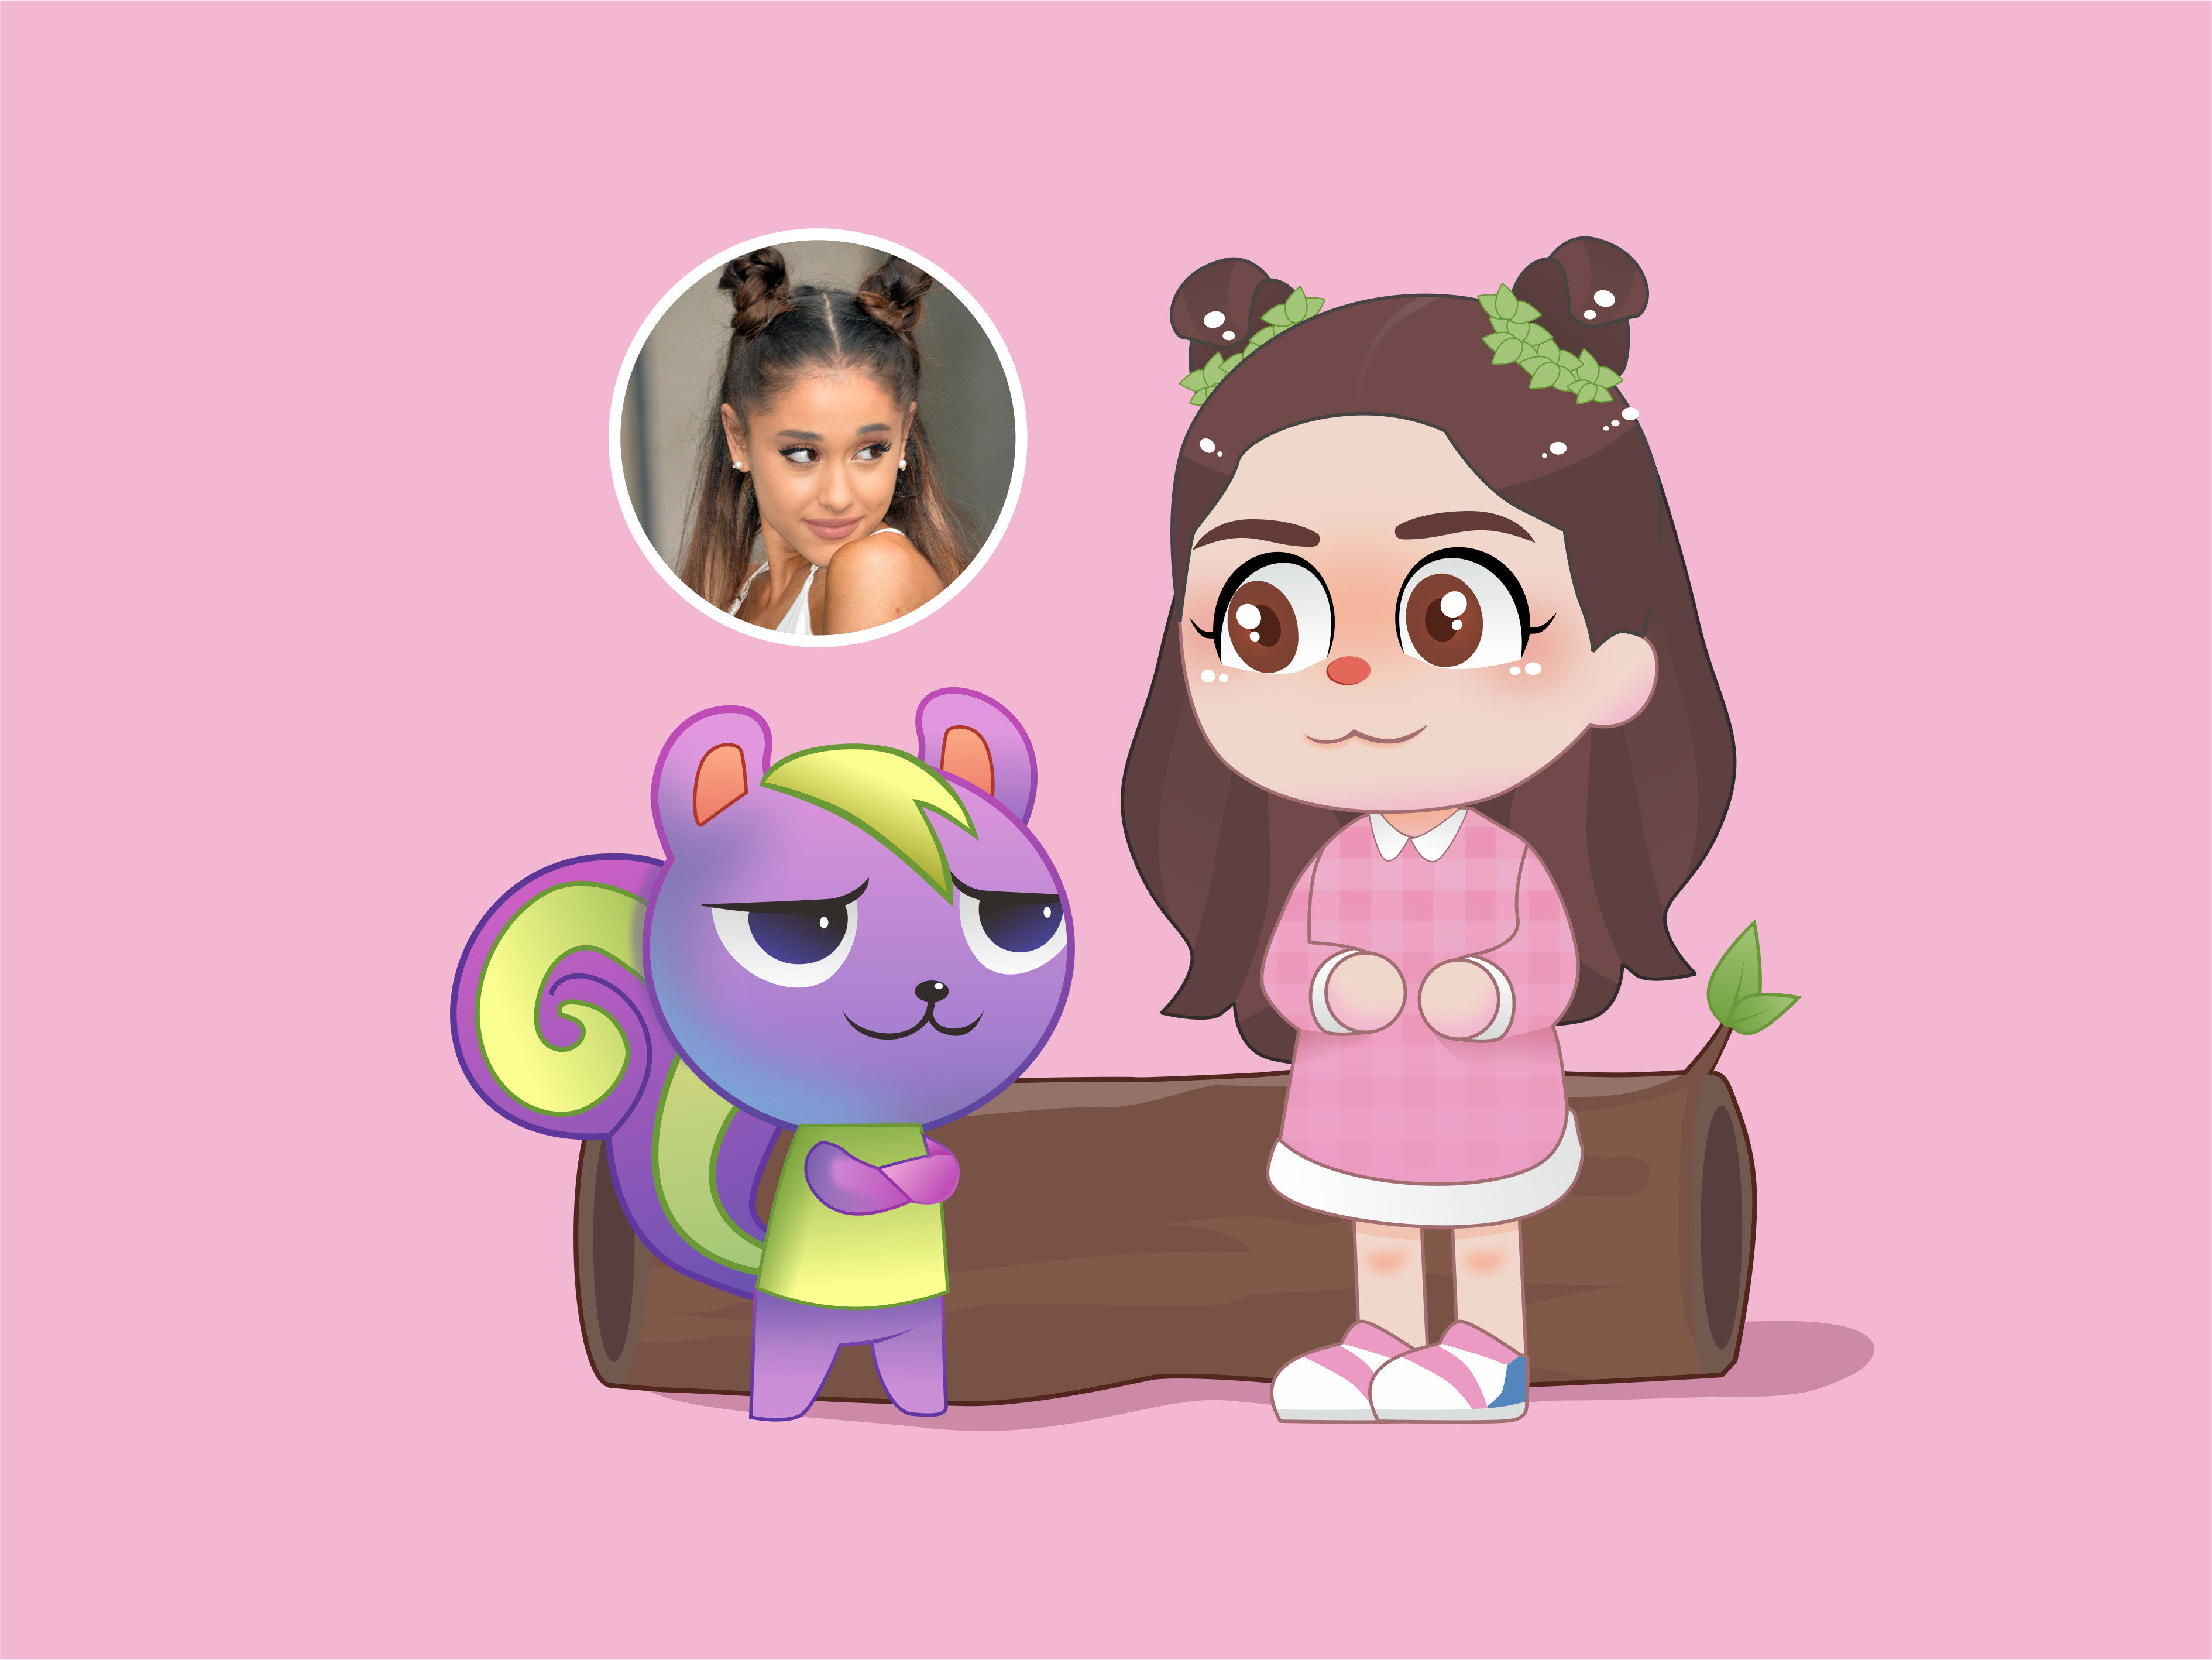 Draw people or animals as animal crossing characters by Titansign | Fiverr